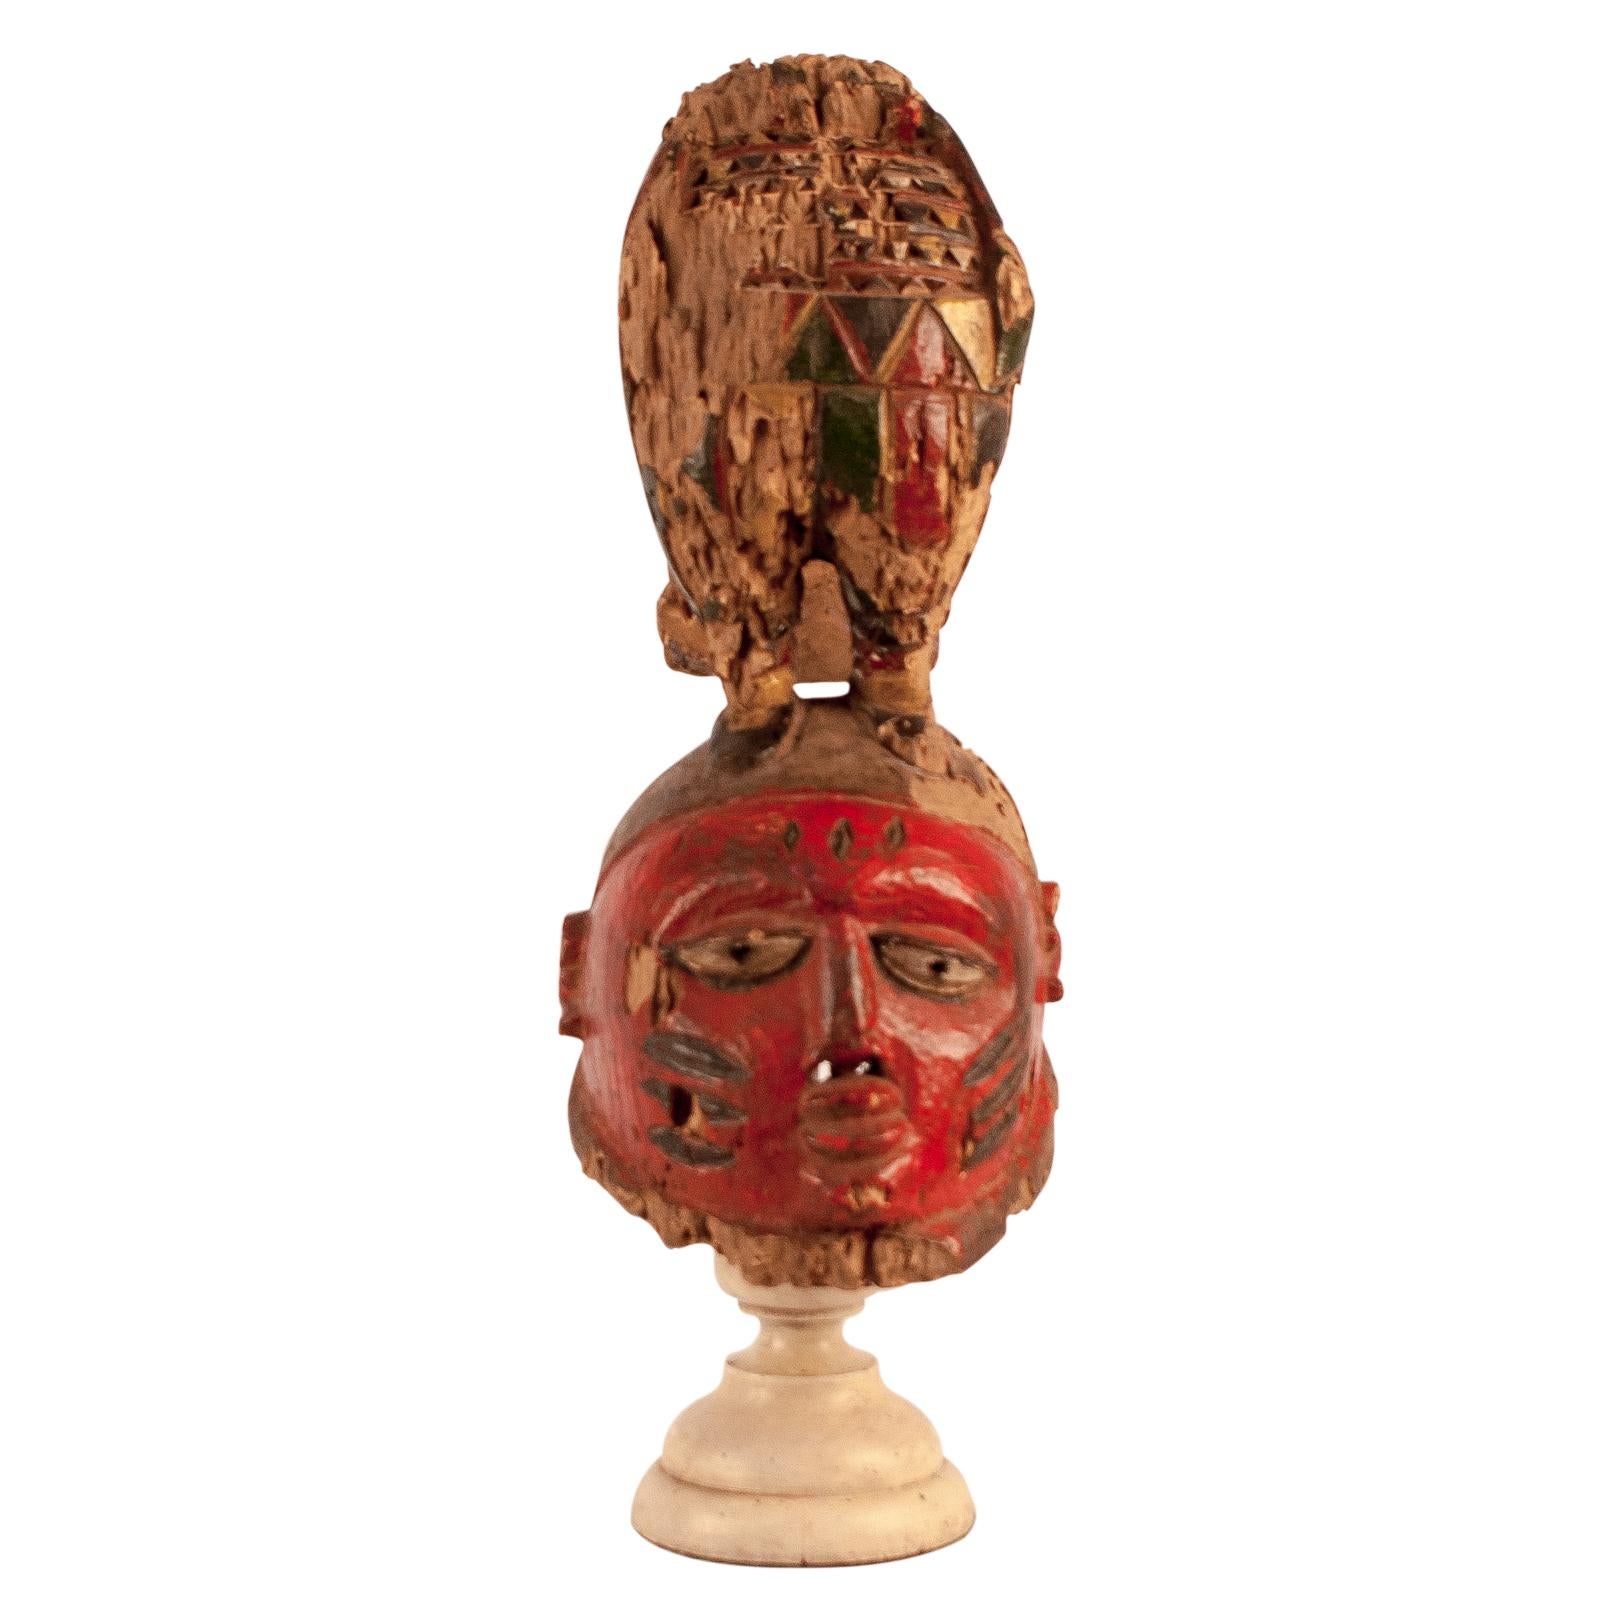 A 19th century Nigerian Igbo dance mask on a later stand. Paint refreshed in the early 20th century. This mask shows extensive inactive insect trails. It is also probable that they painted this several times. This was worn on the top of the head